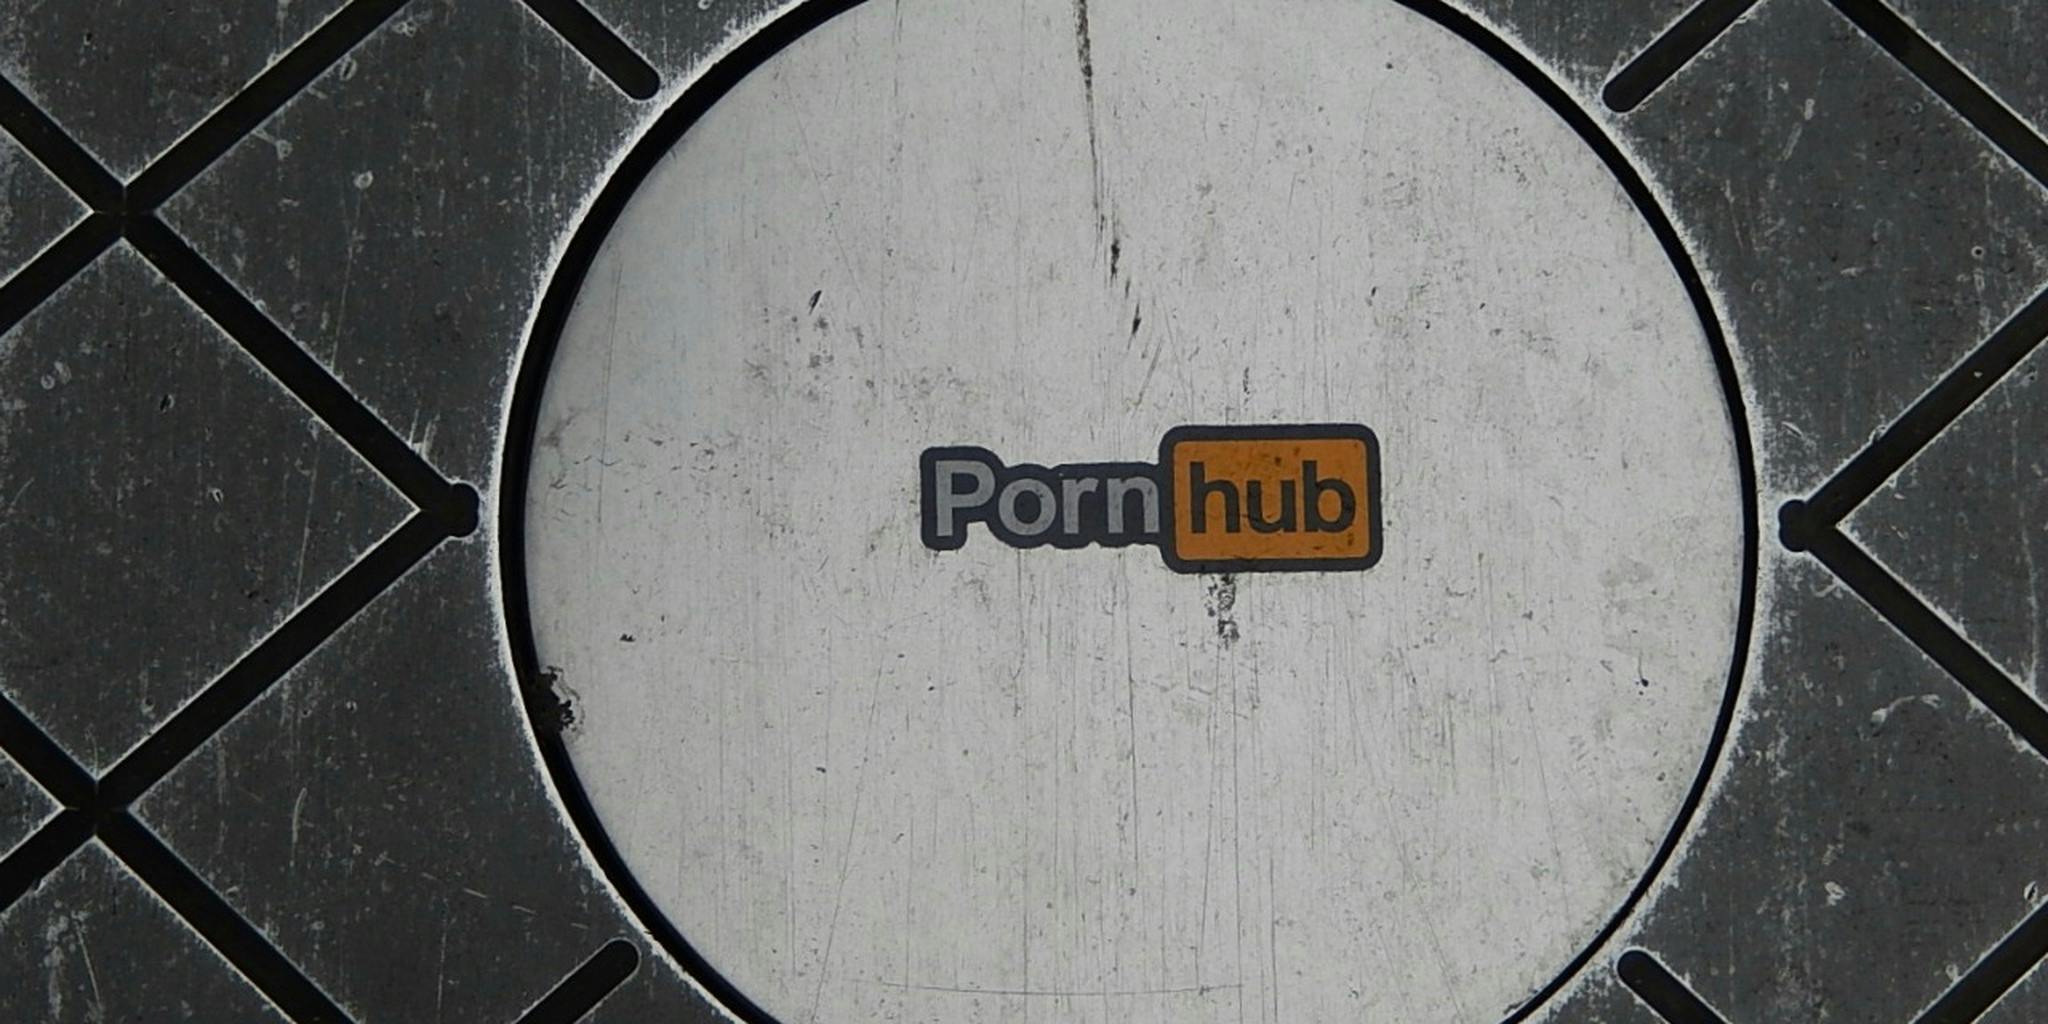 PornHub looking to penetrate the world of sports sponsorship